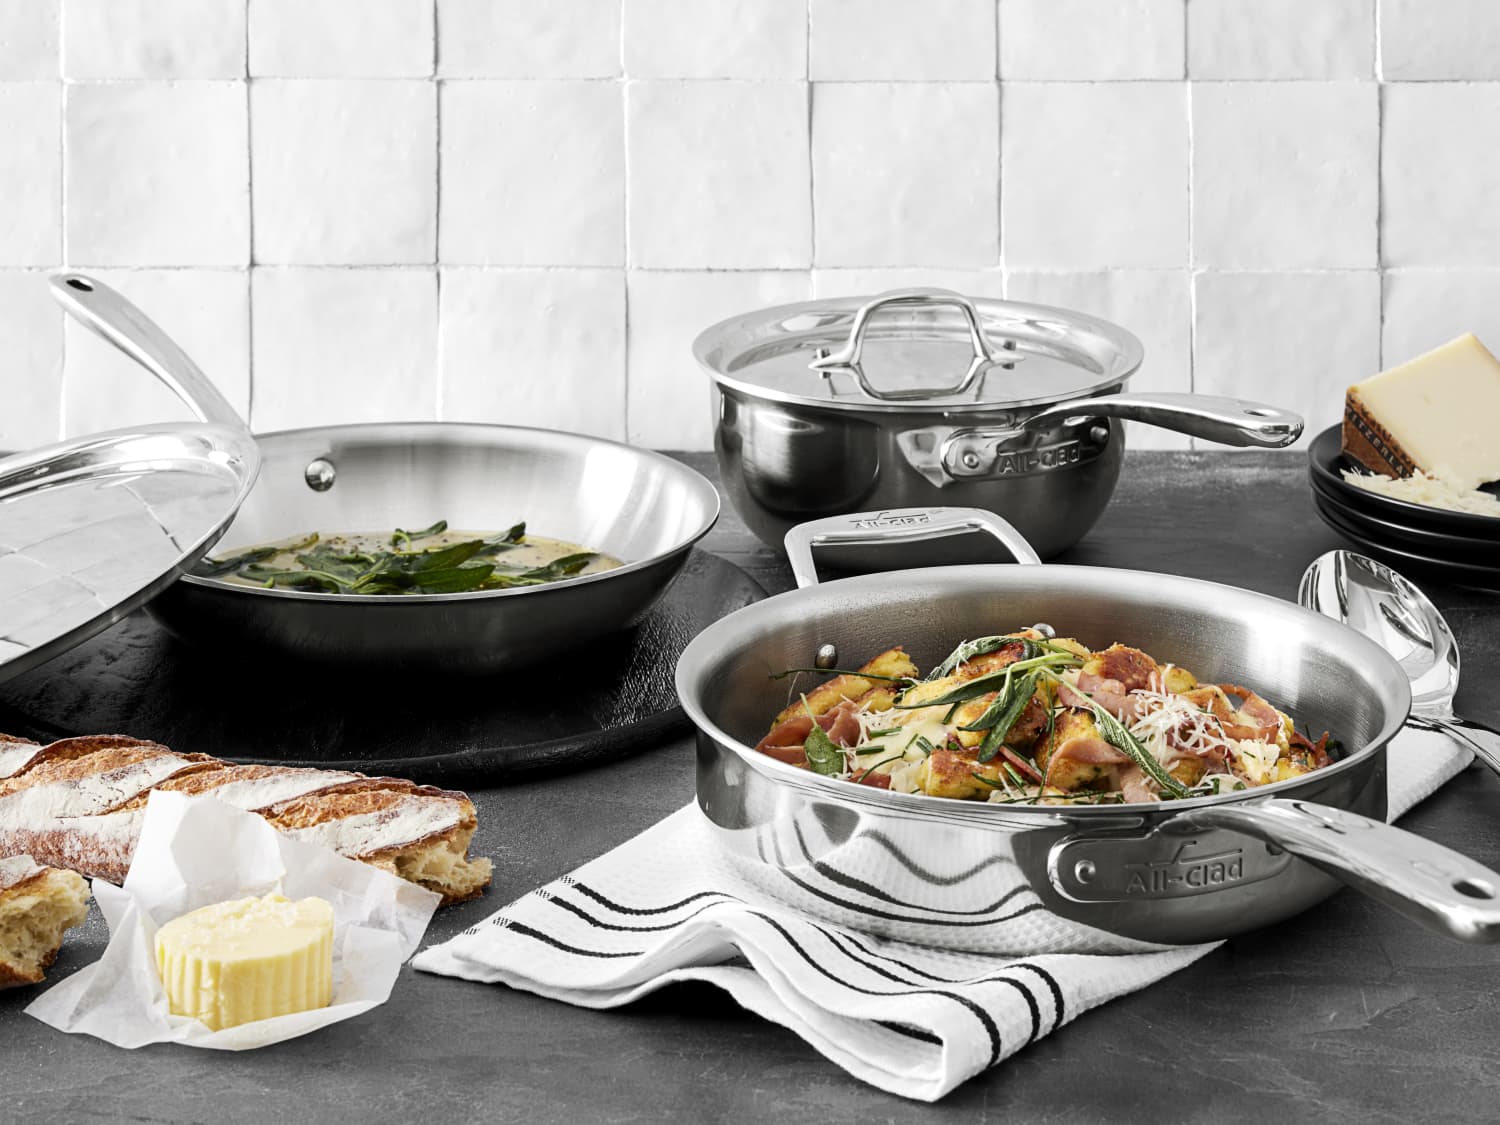 All-Clad d5 Stainless-Steel 15-Piece Cookware Set